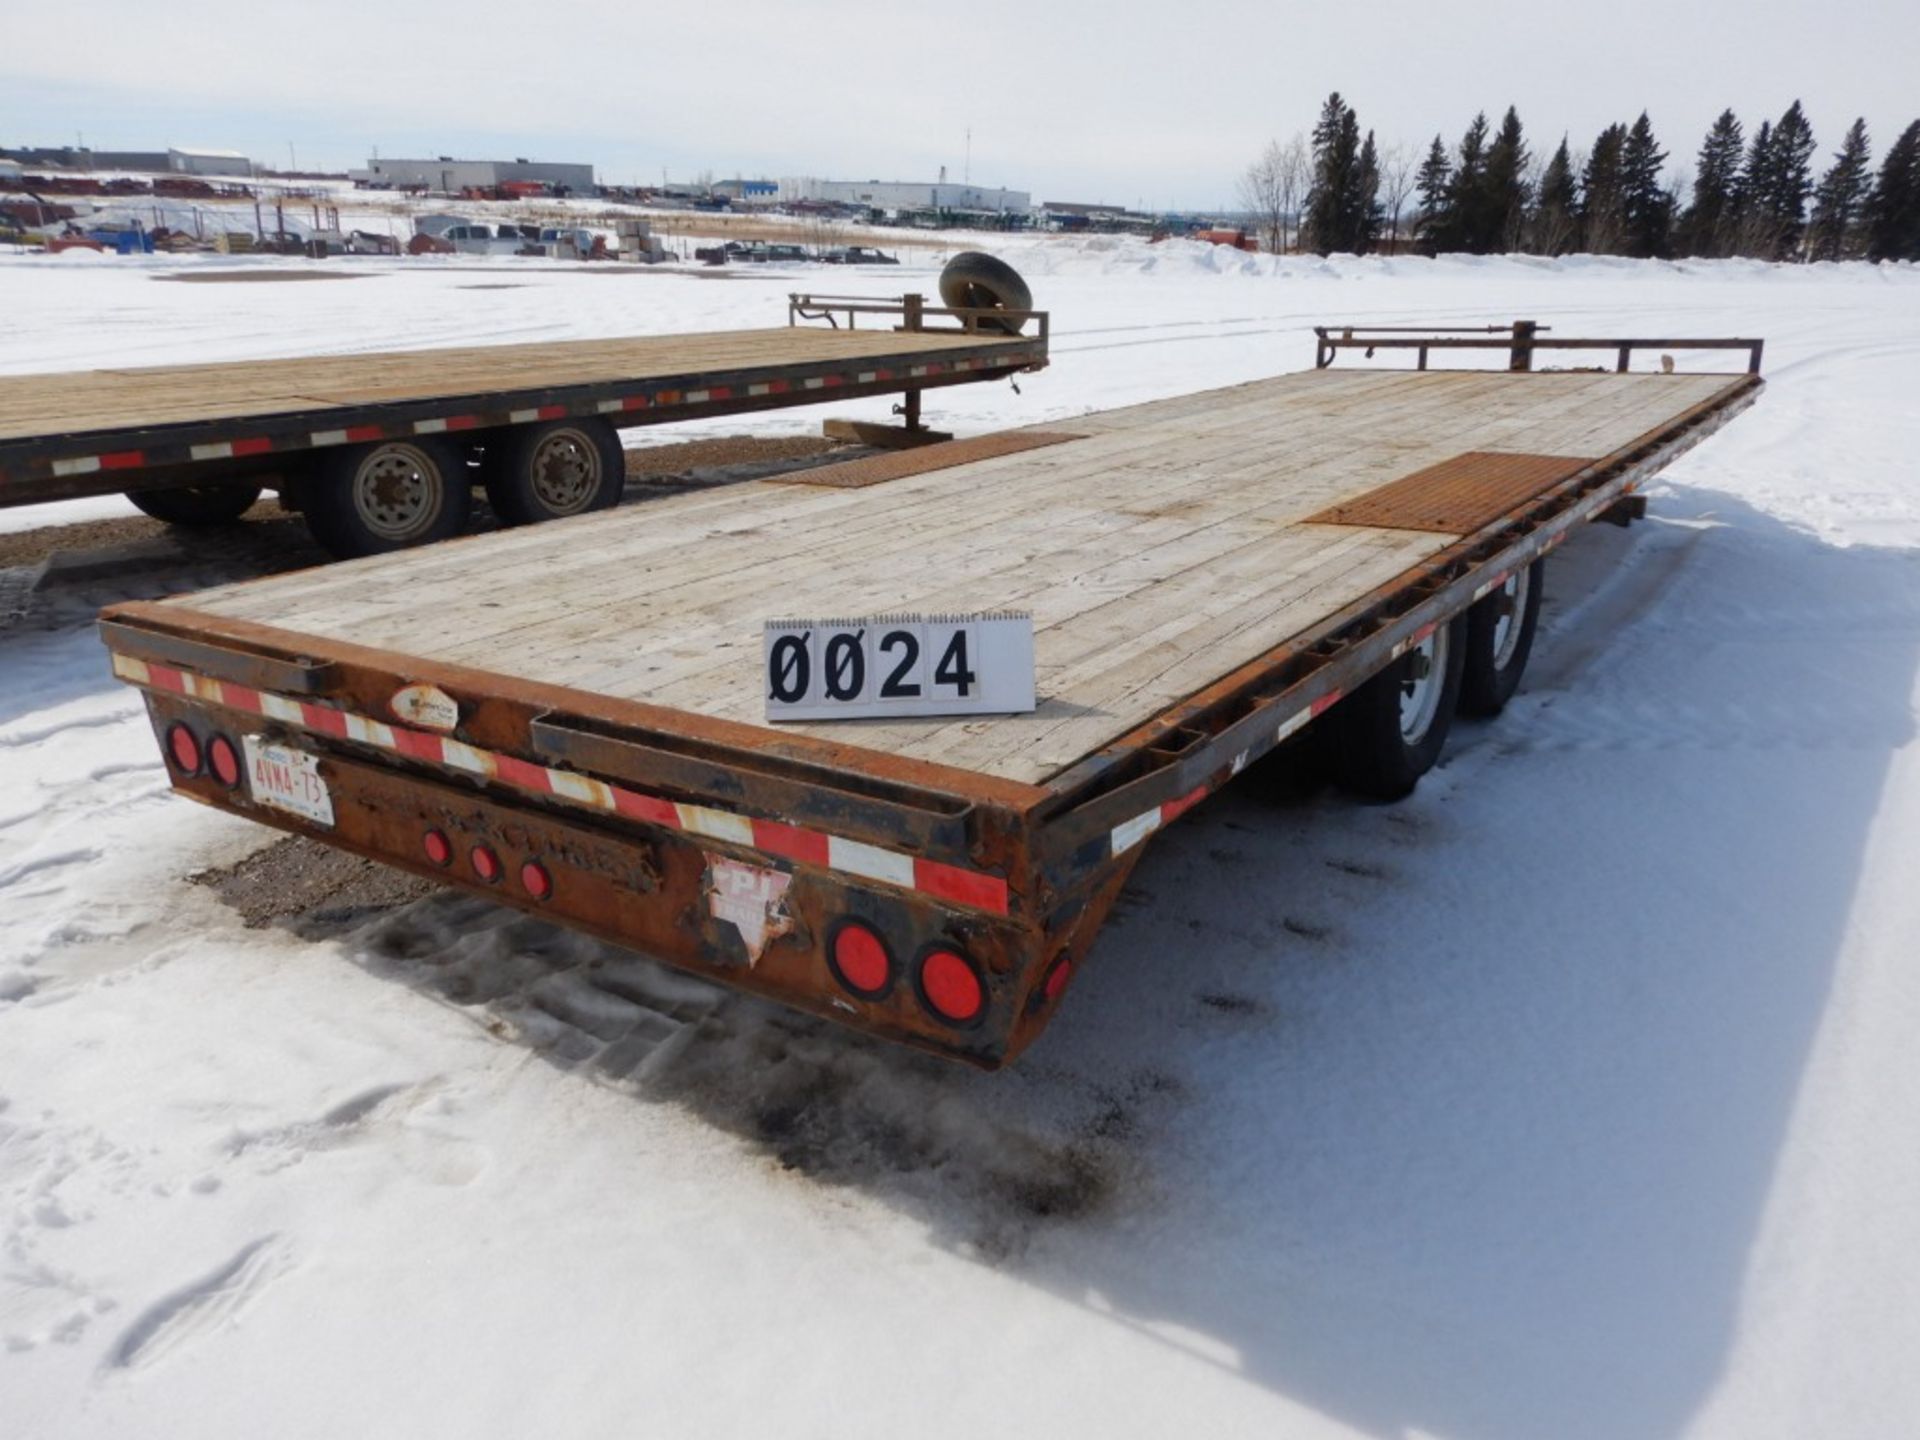 2013 PJ T/A 14000LB DECK-OVER EQUIPMENT TRAILERS W/RAMPS, BALL HITCH, 8'6" X 24FT - Image 2 of 6